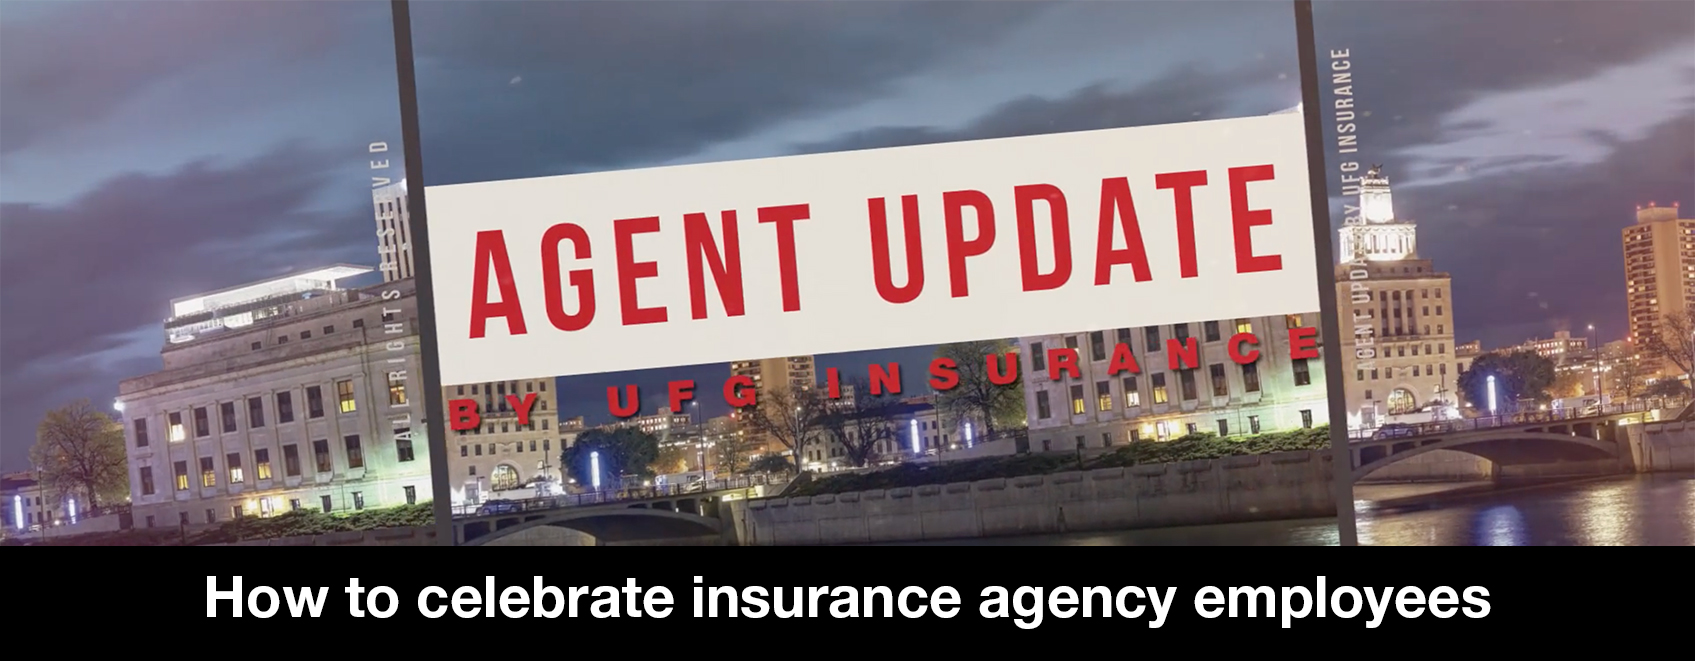 Agent update for how to celebrate insurance agency employees